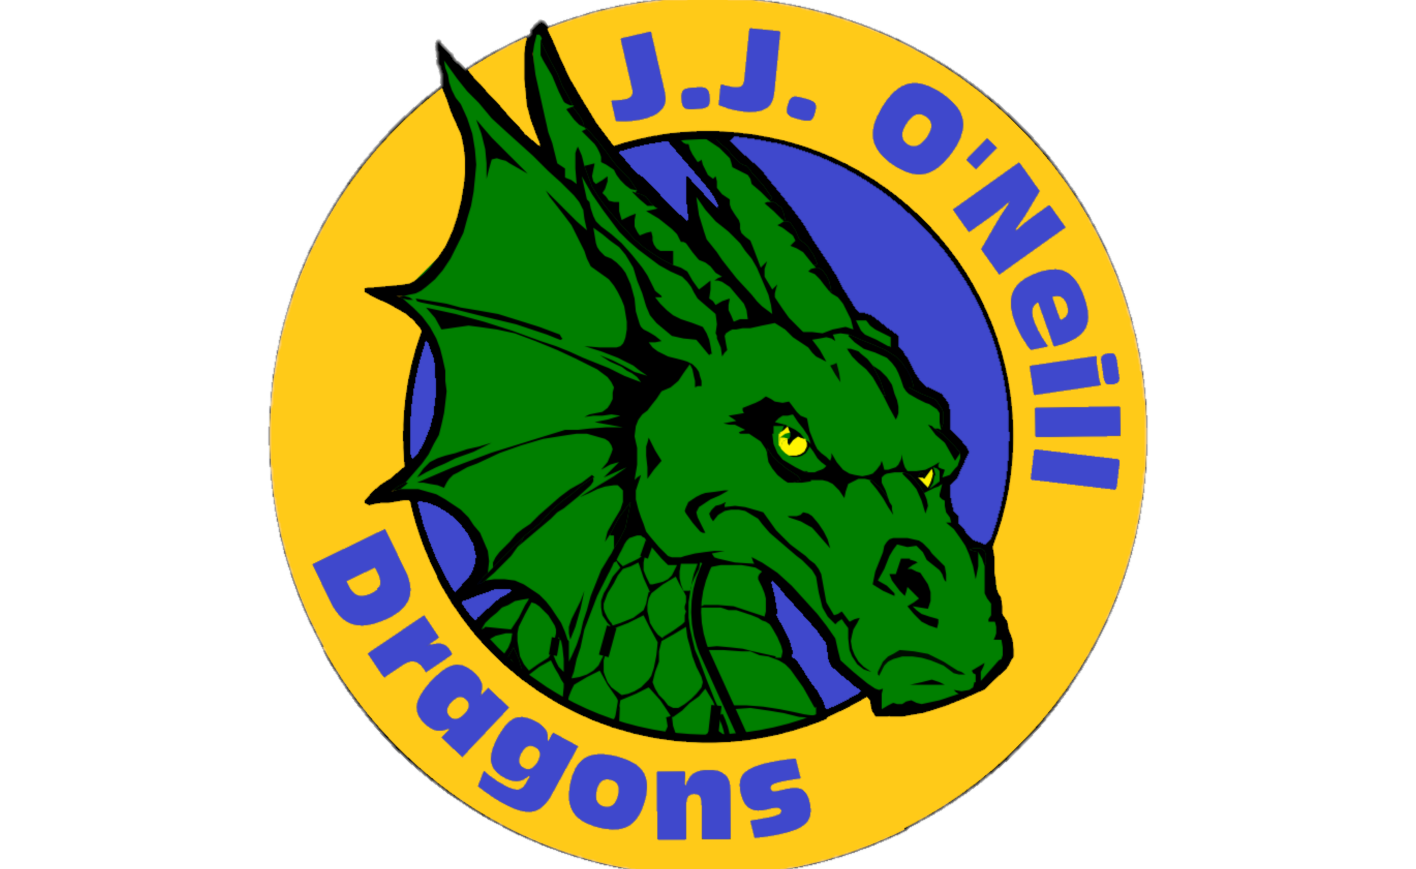 Home of the Dragons!